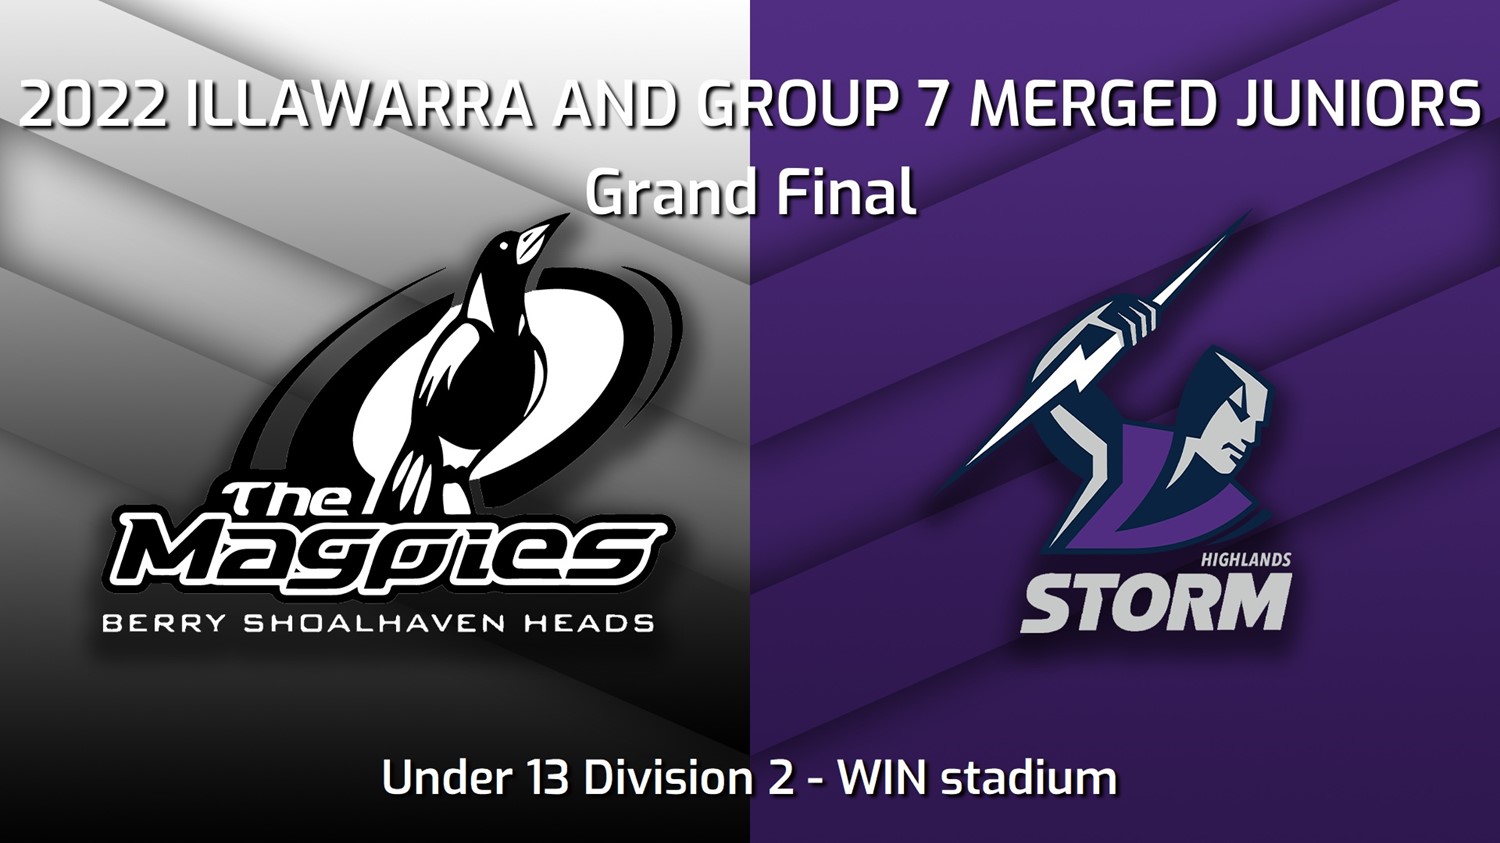 220903-2022 Illawarra and Group 7 Merged Juniors Grand Final - U13 Division 2 - Berry-Shoalhaven Heads Magpies v Southern Highlands Storm Slate Image